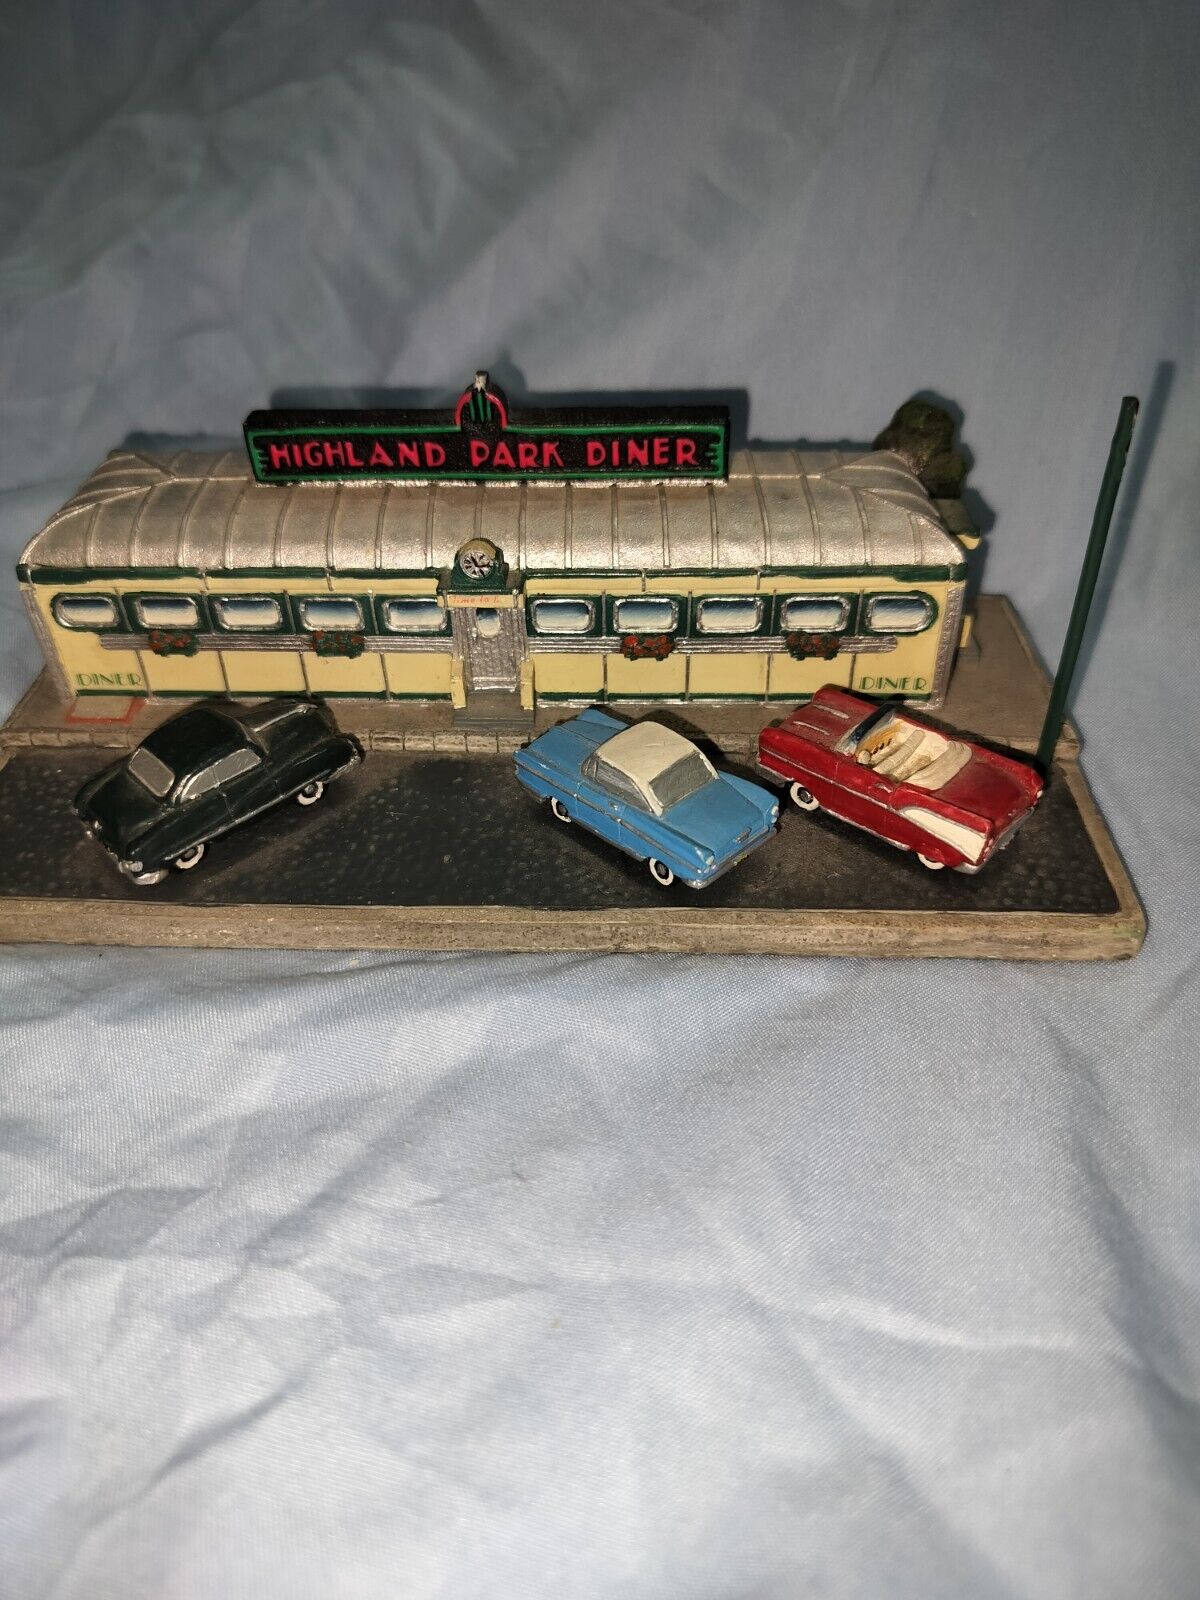 The  Danbury Mint Highland  Park Diner Classic American Diners Collectible 1993